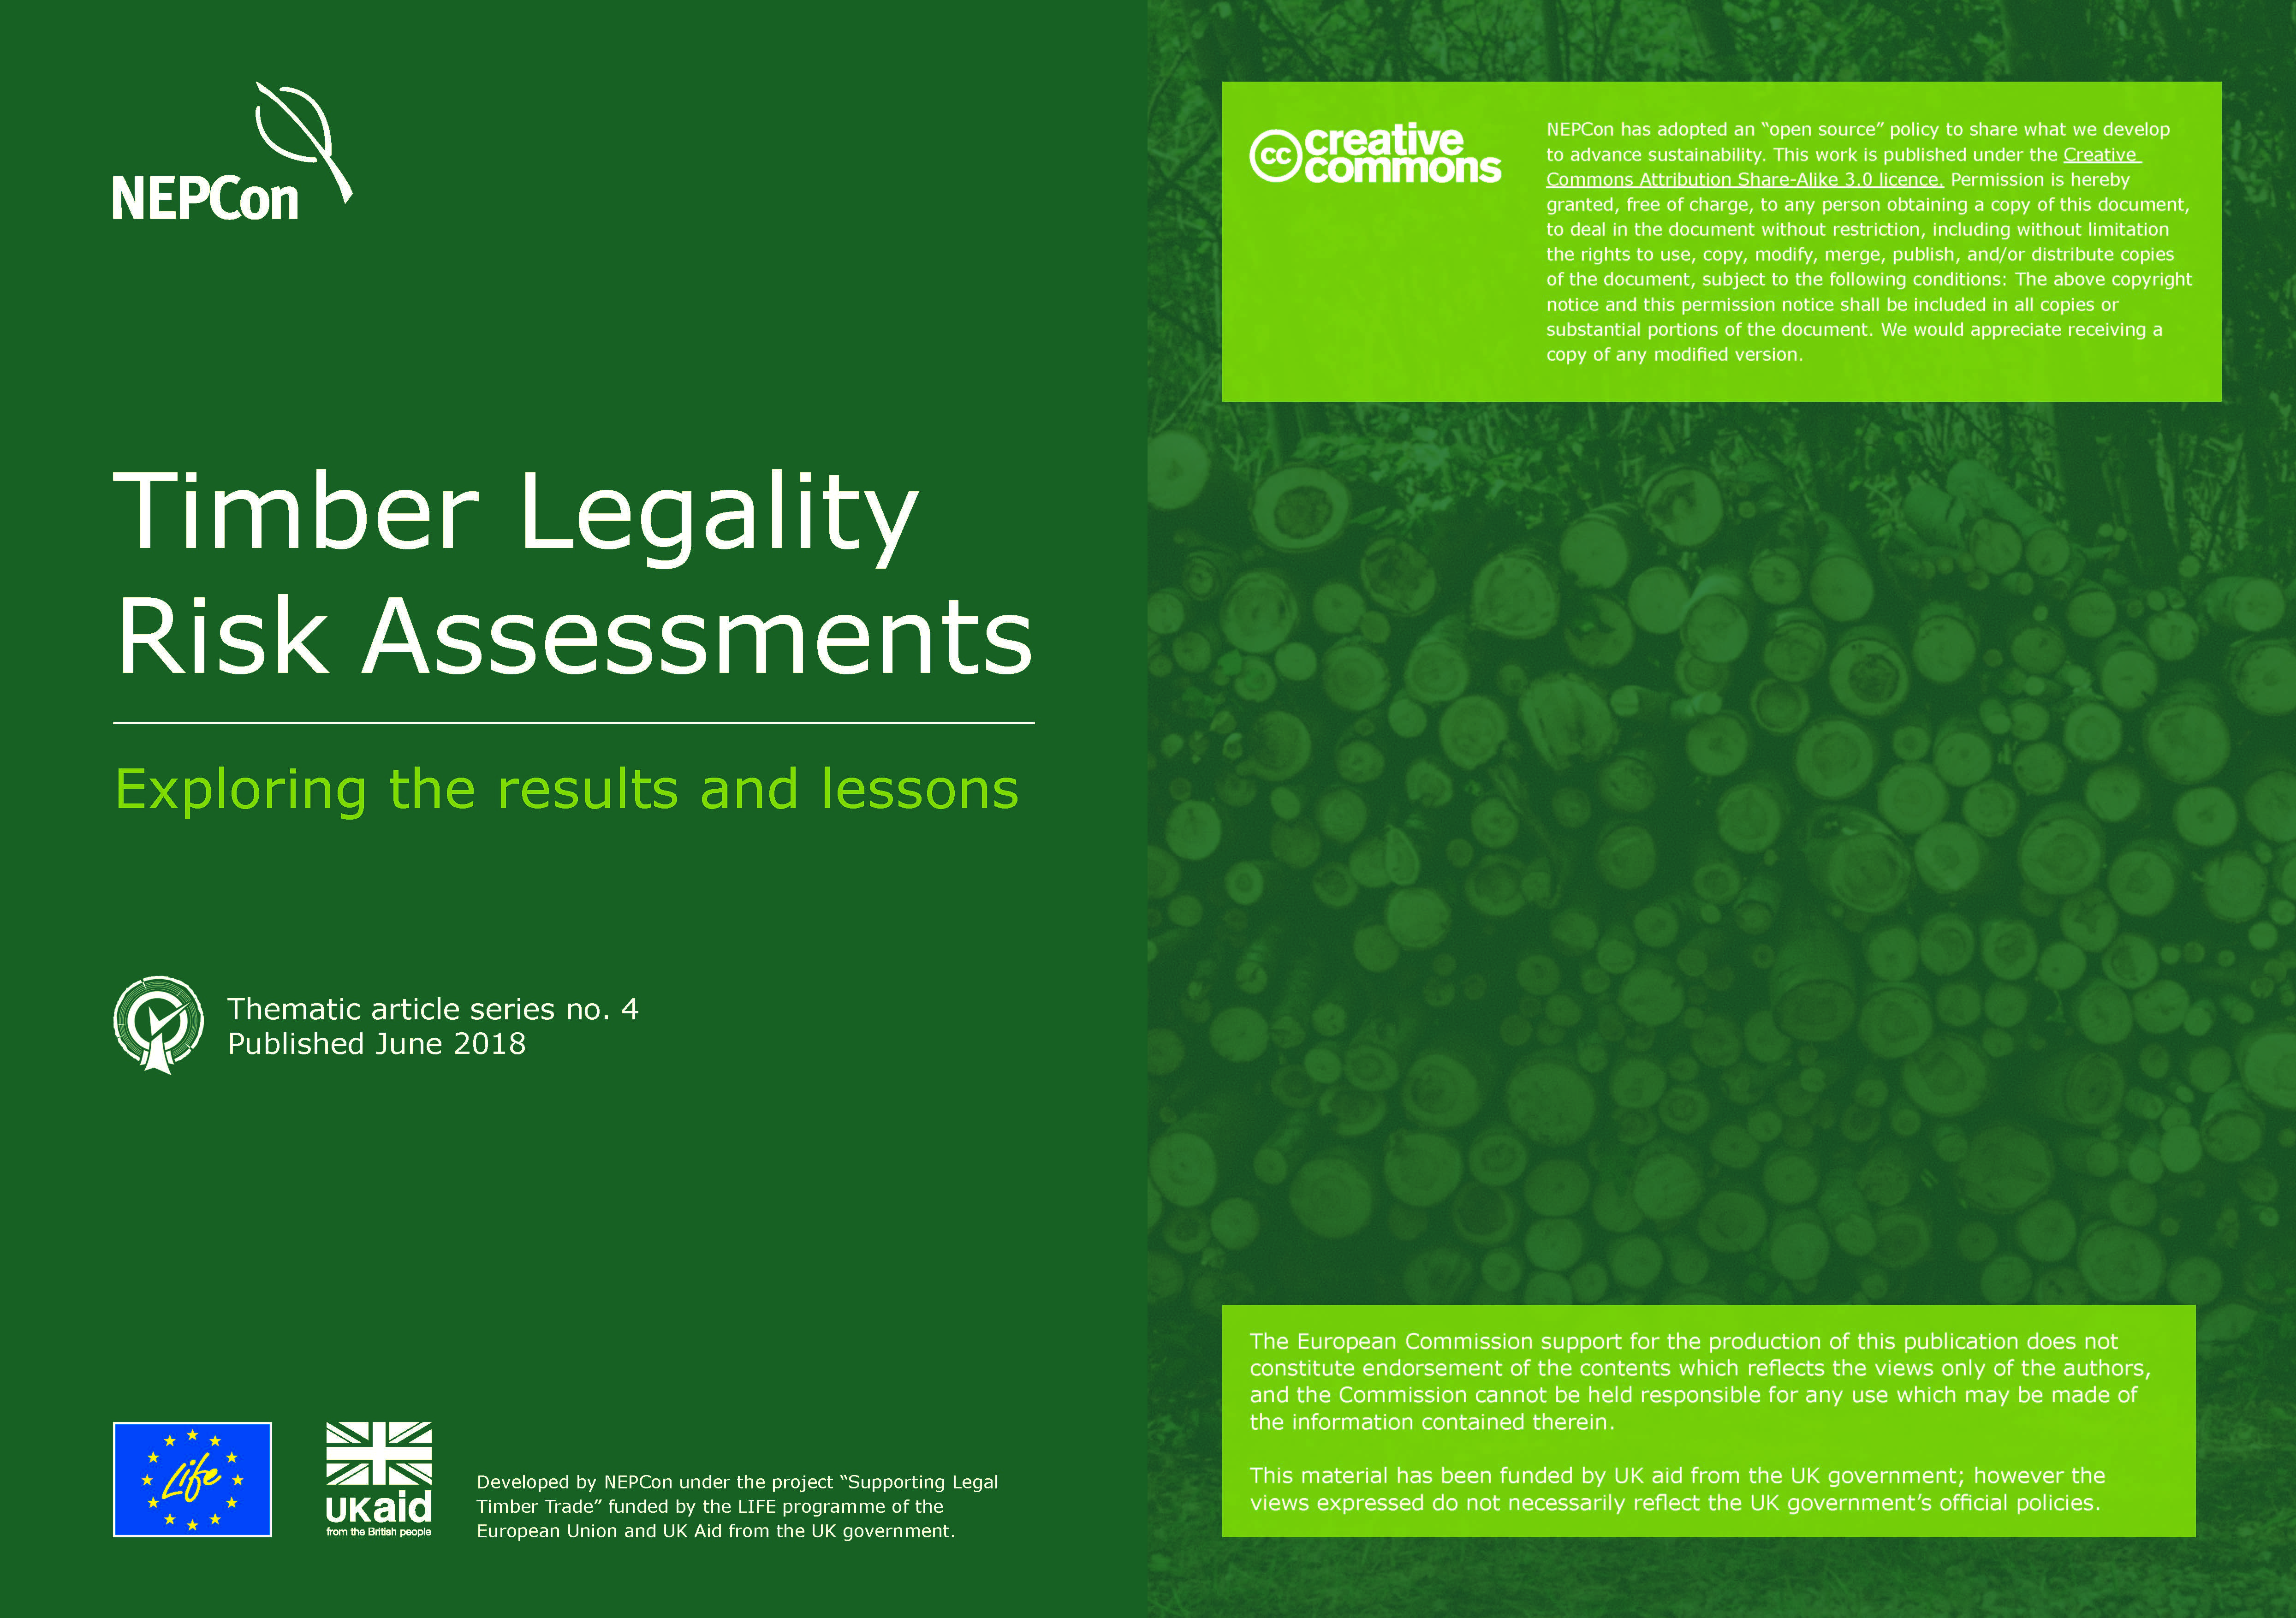 THEMATIC ARTICLE NO.4: TIMBER LEGALITY - EXPLORING THE RESULTS AND LESSONS